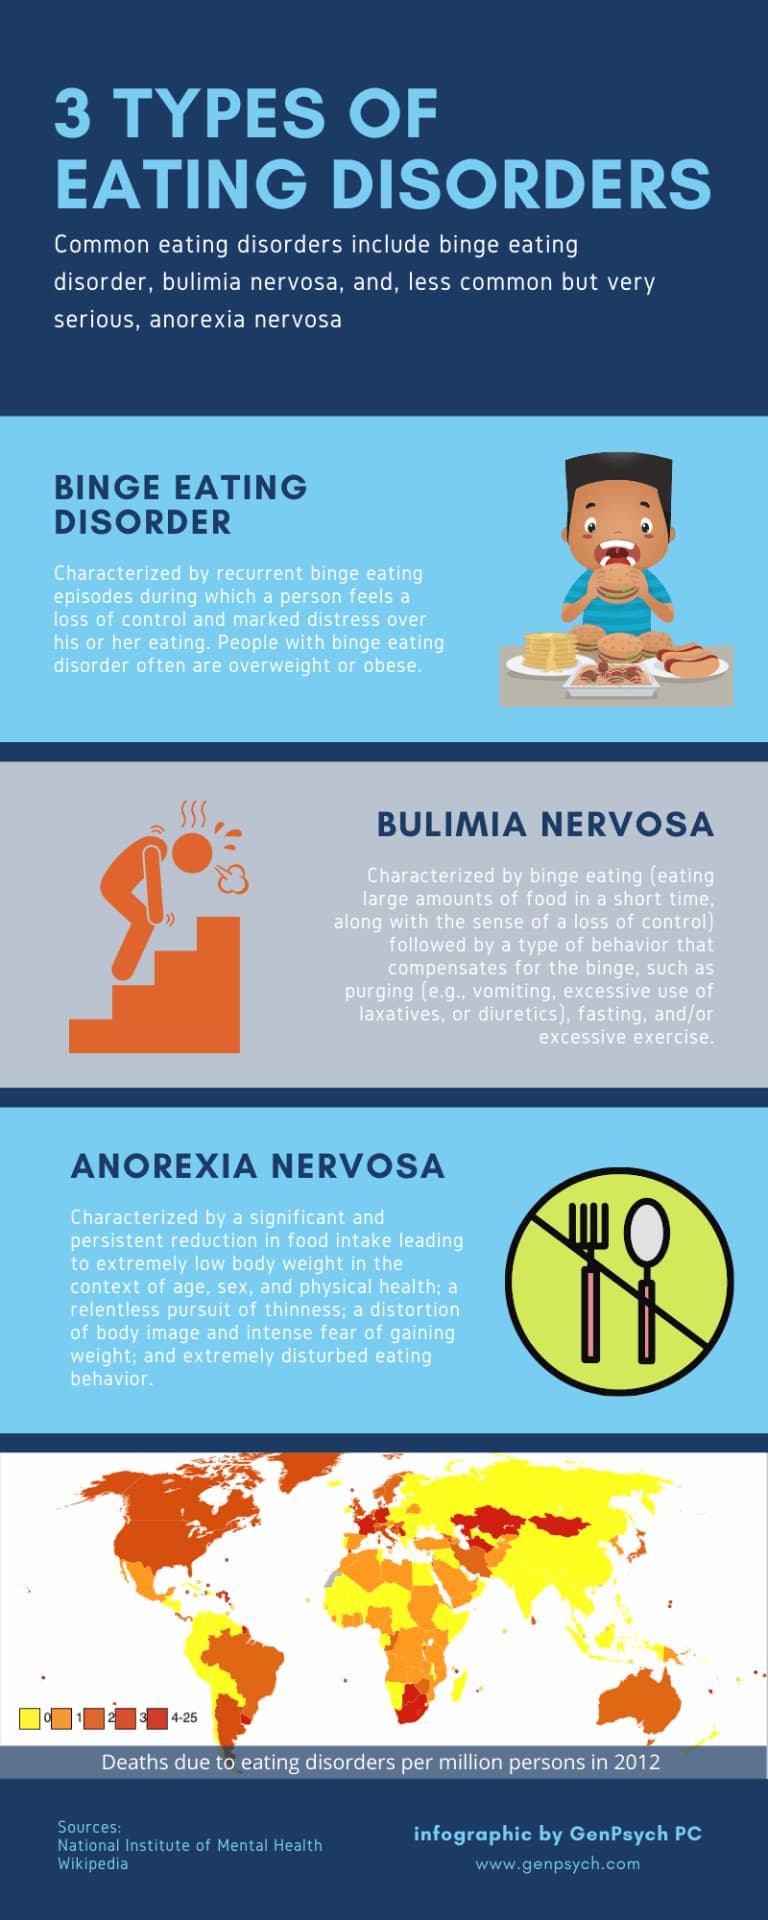 What are the most common types of eating disorders?